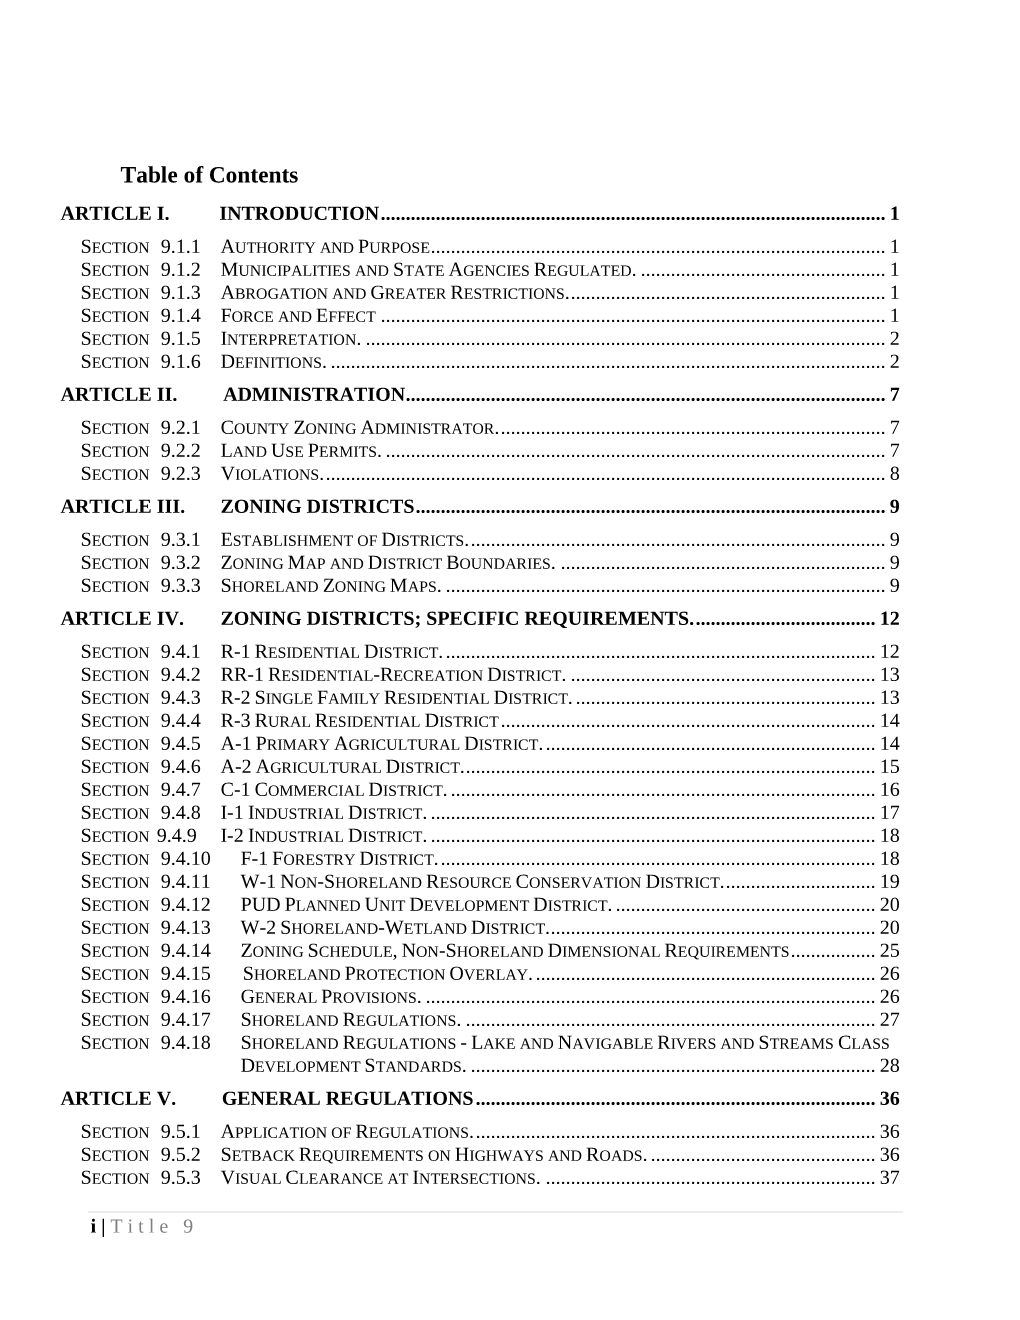 Table of Contents ARTICLE I